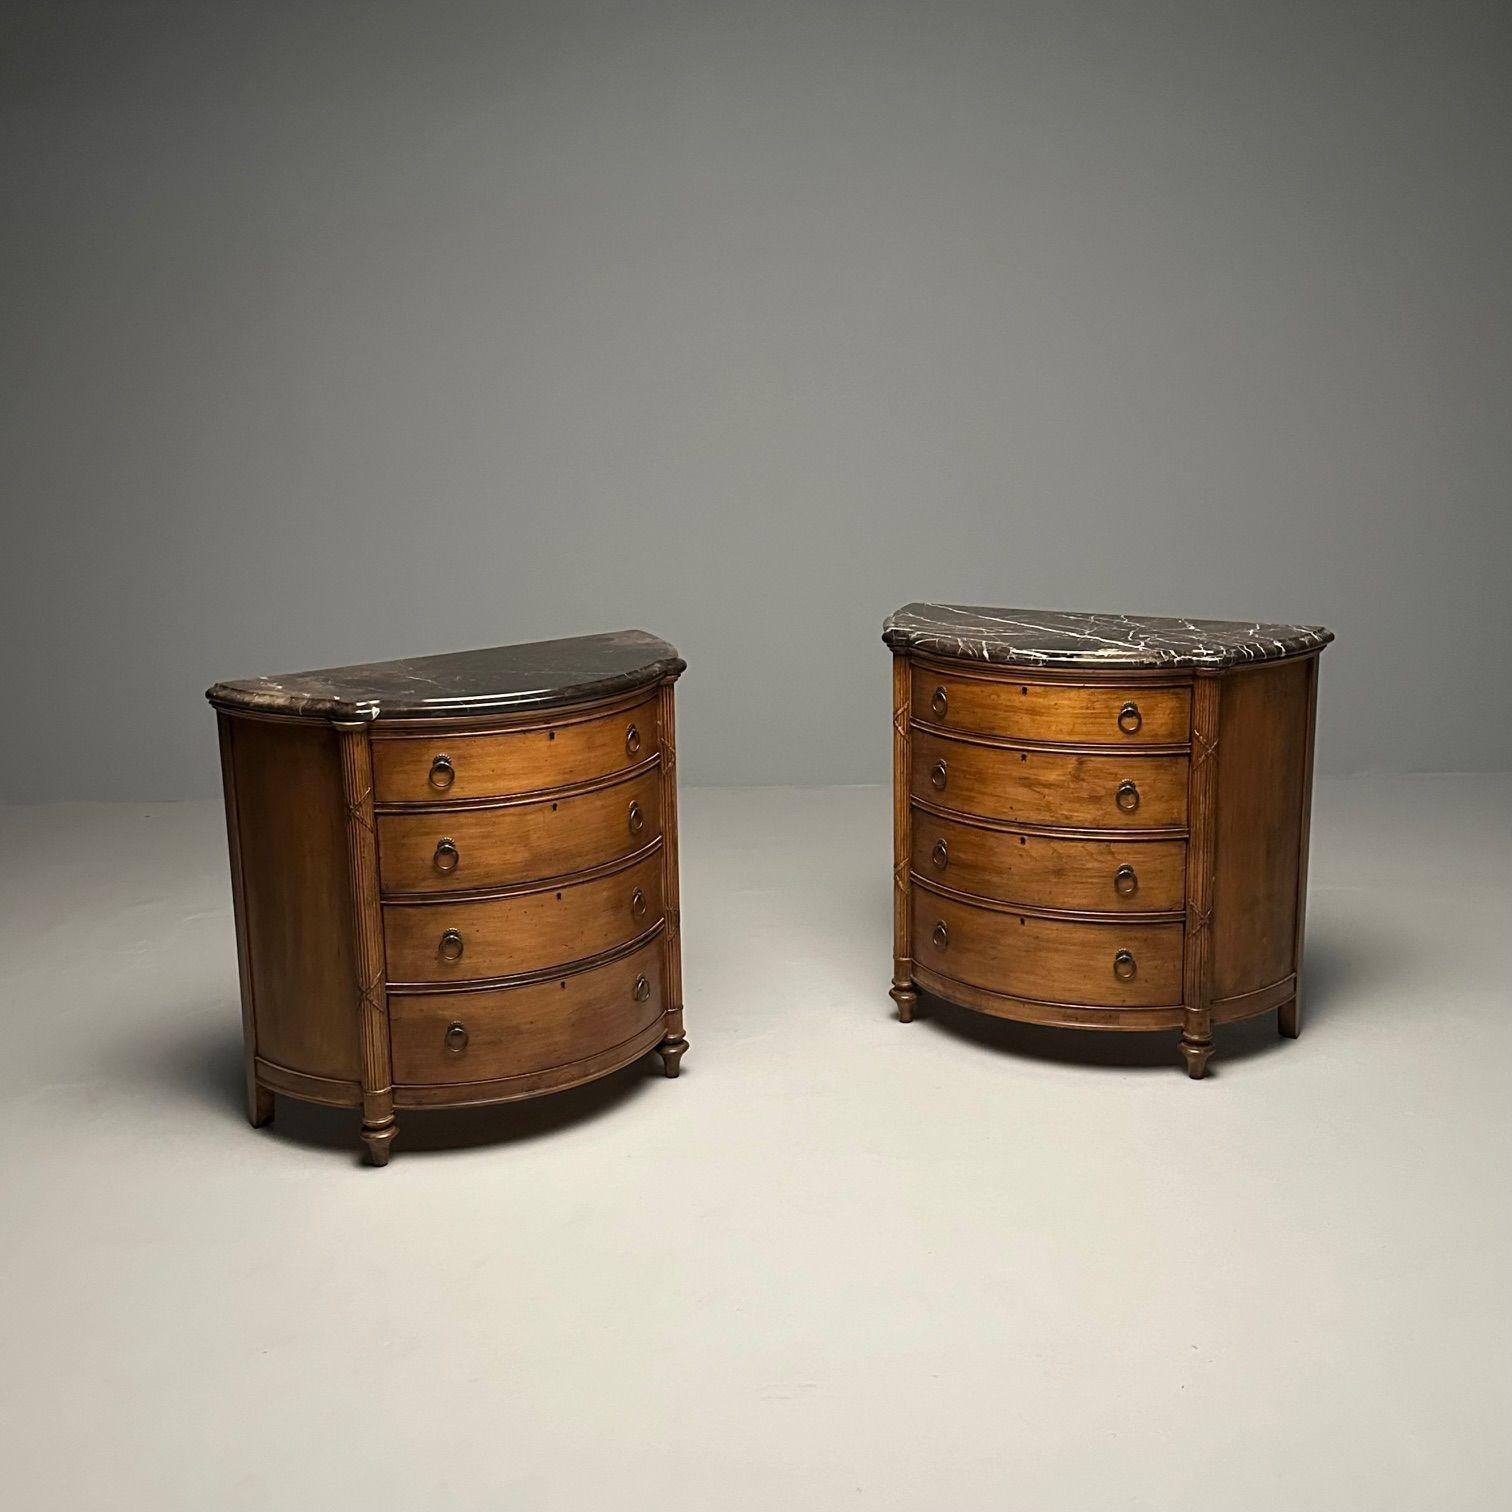 20th Century Pair of Regency Style Demilune Commodes / Cabinet, Marble Top, Walnut